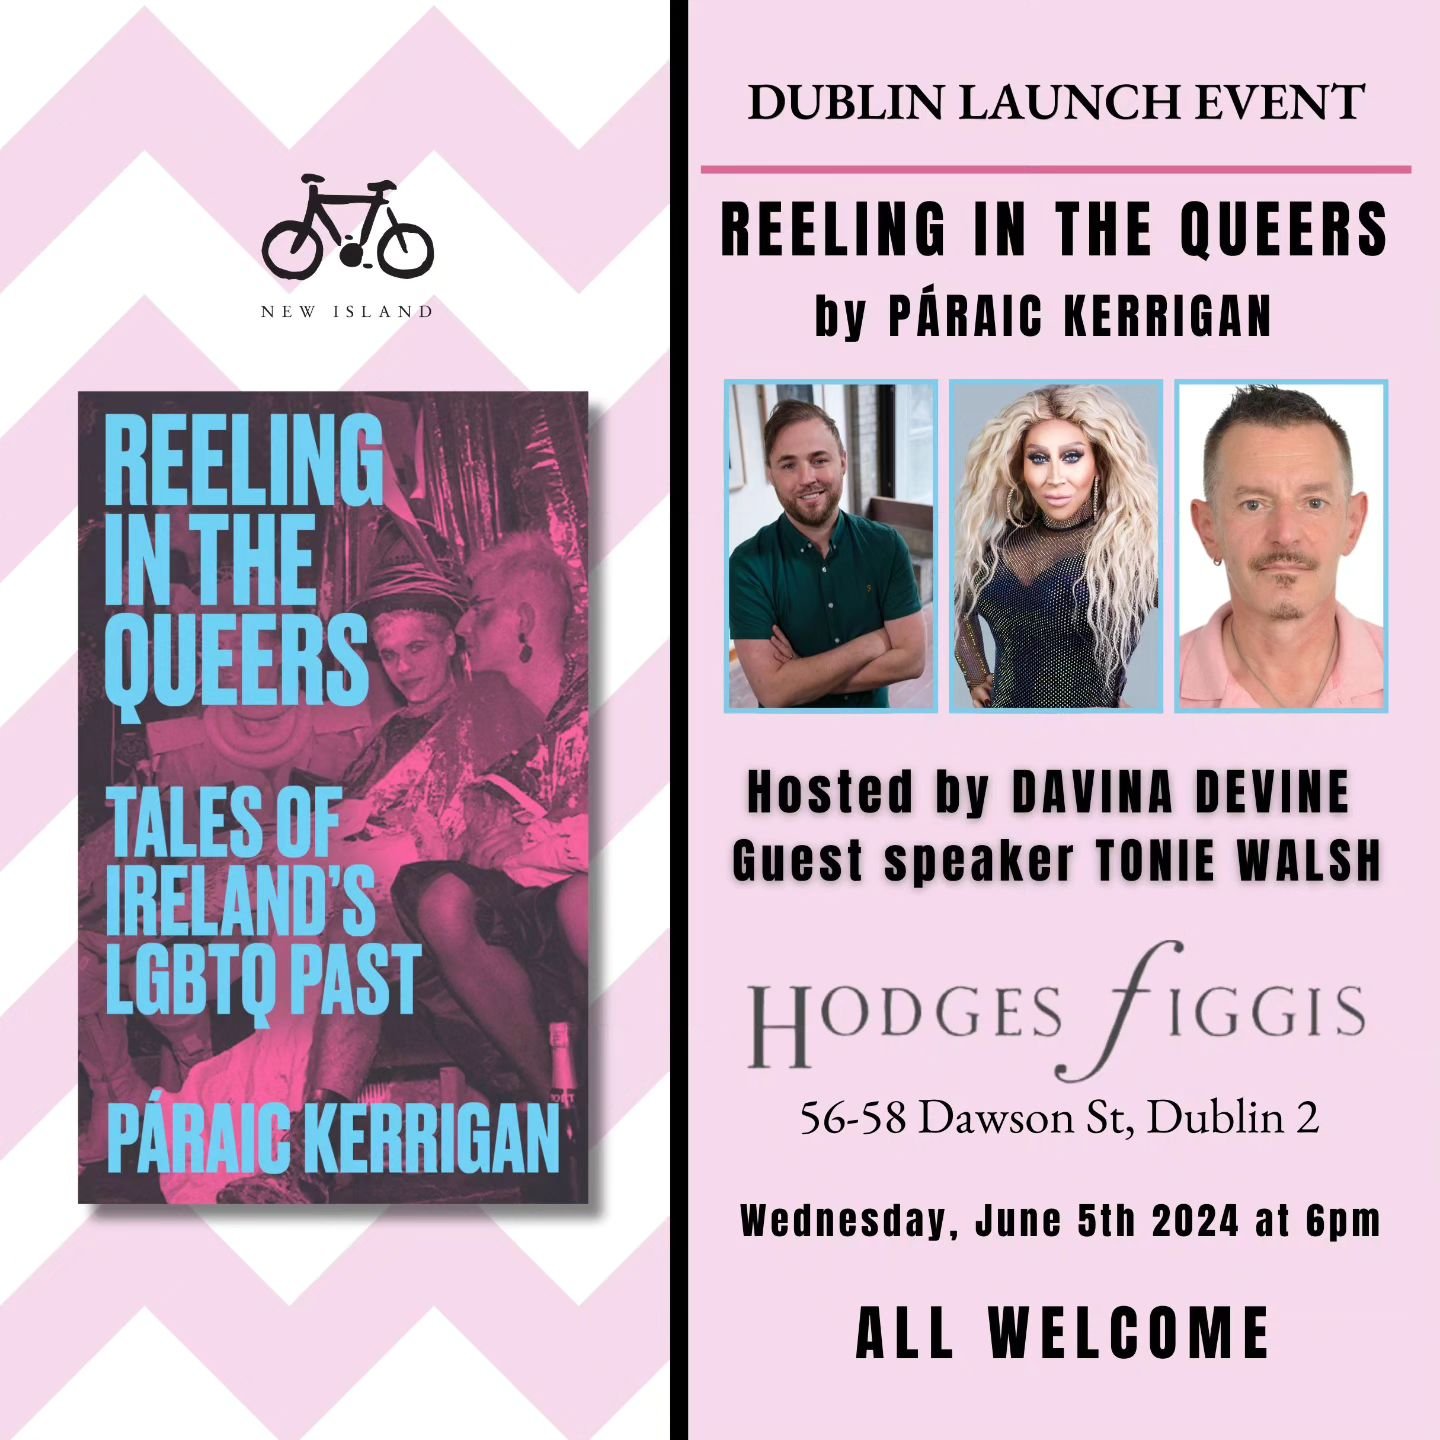 You are ALL invited to the launch of Reeling in the Queers by @paraickerrigan on Wednesday 5th of June in @hodgesfiggis &nbsp;🏳️&zwj;🌈

Hosted by the fabulous @davina.devine and featuring guest speaker @toniewalsh this is not to be missed!